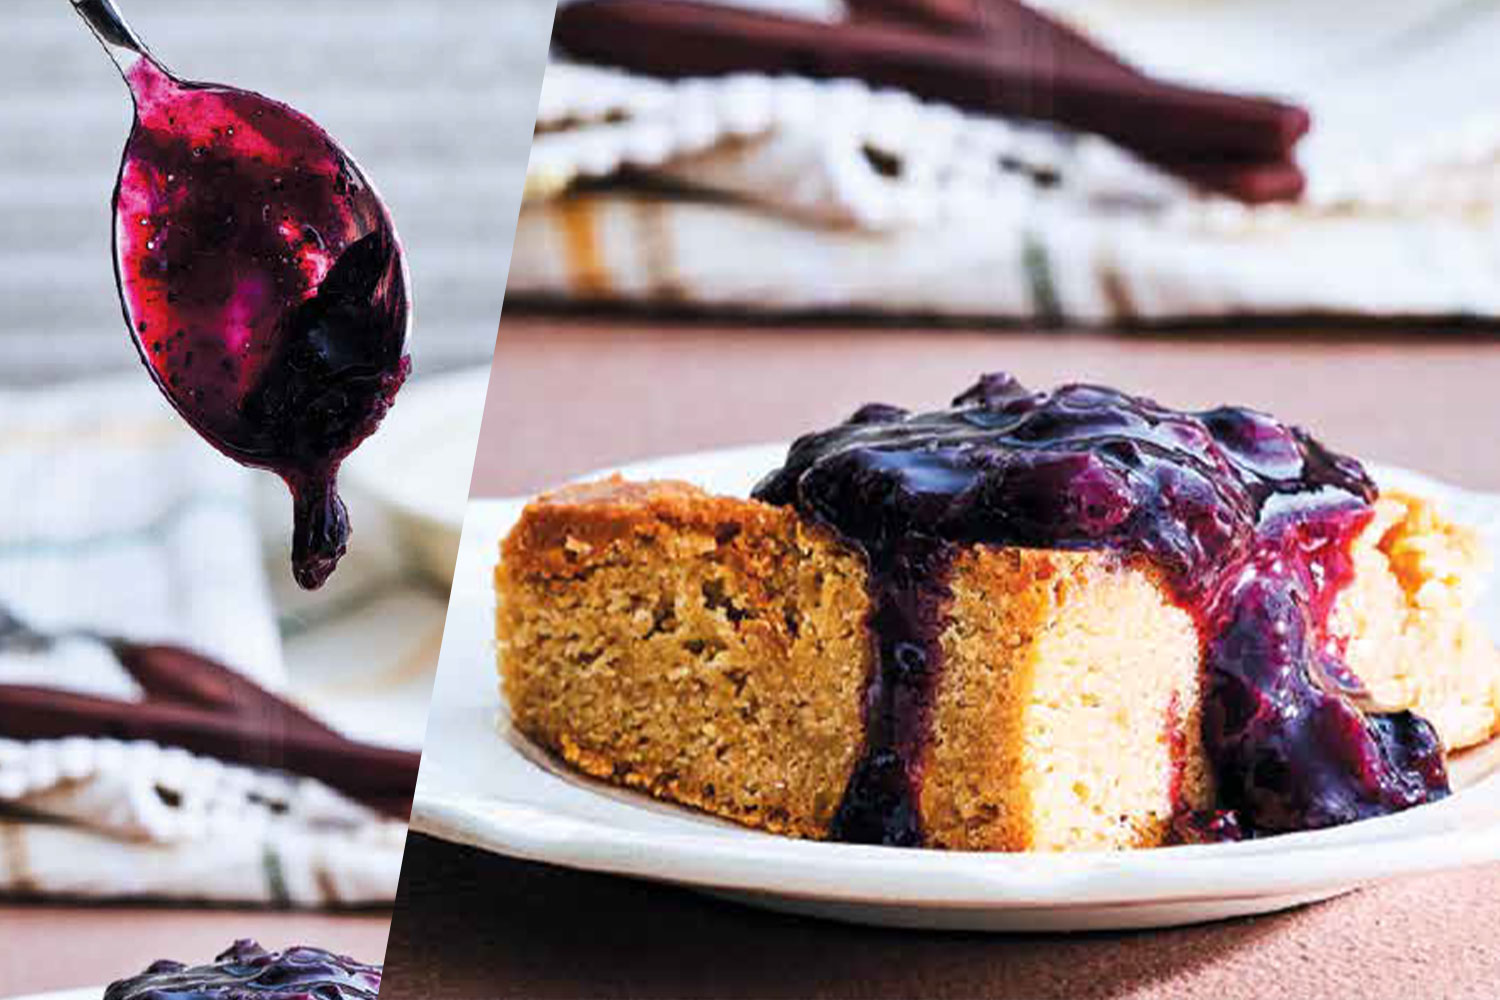 Collage of spoon dripping and a blondie with blueberry compote on the top